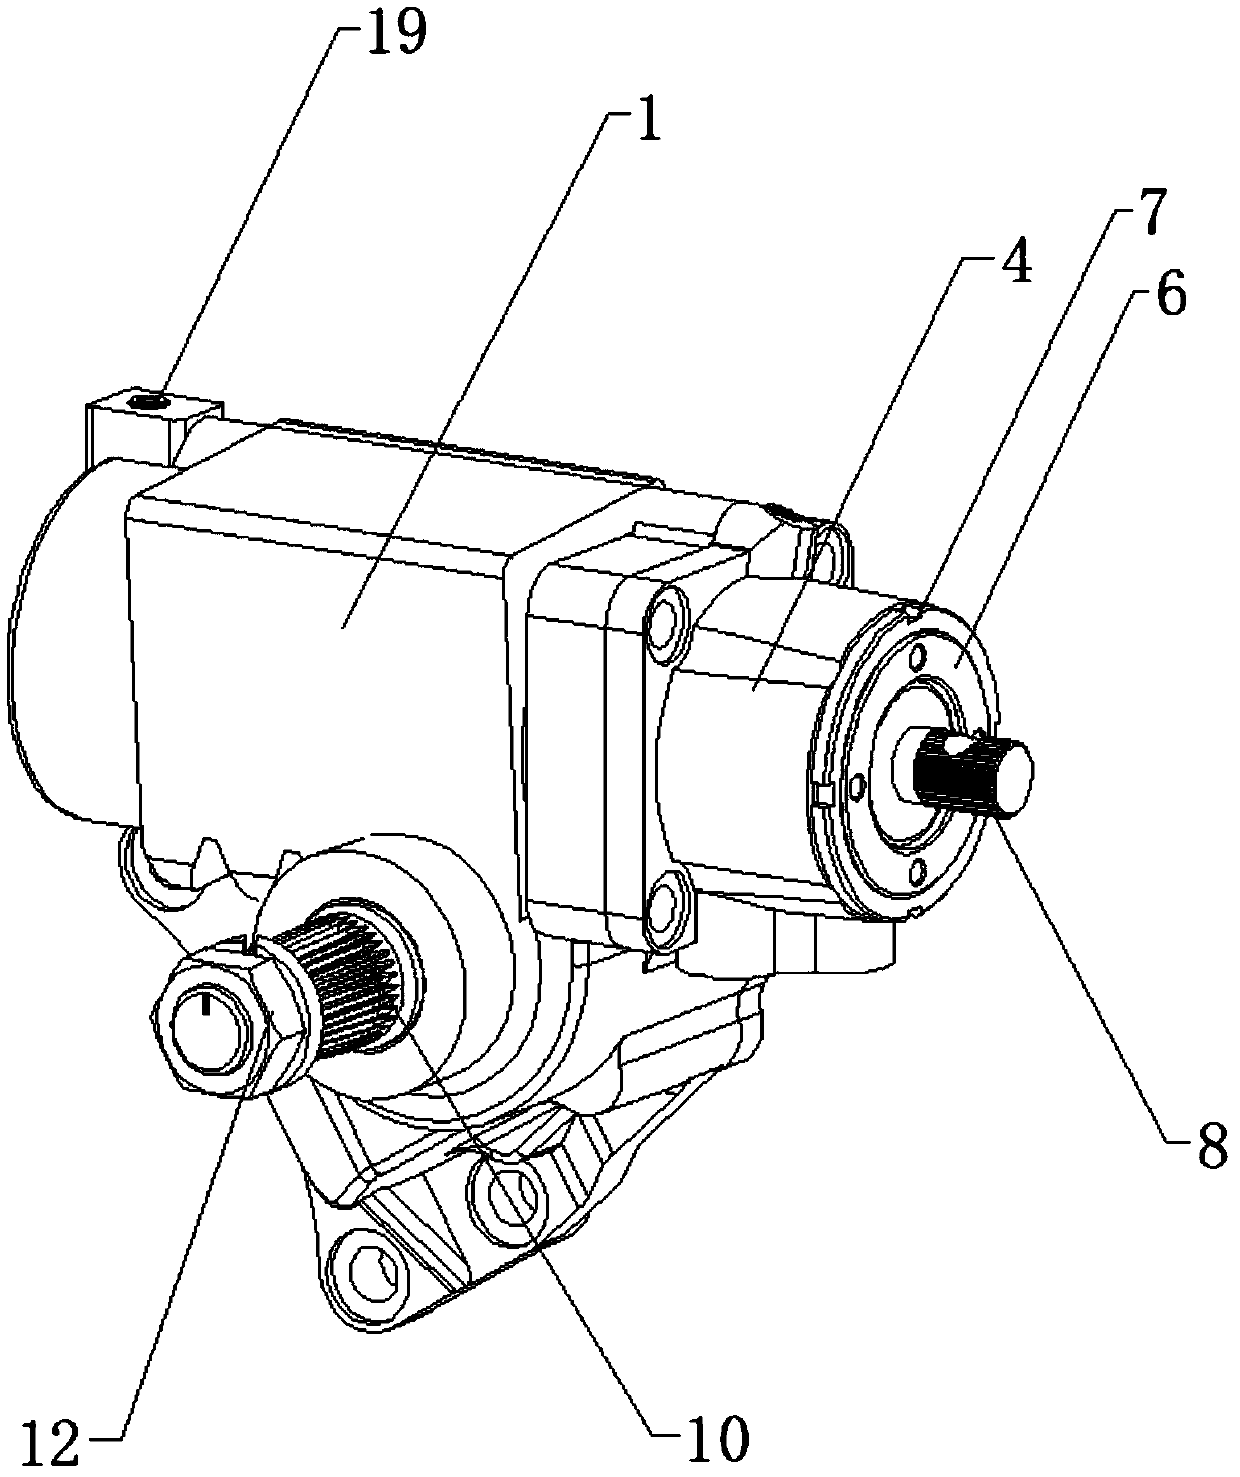 Internal circulation structure of screw and nut assembly for commercial vehicle